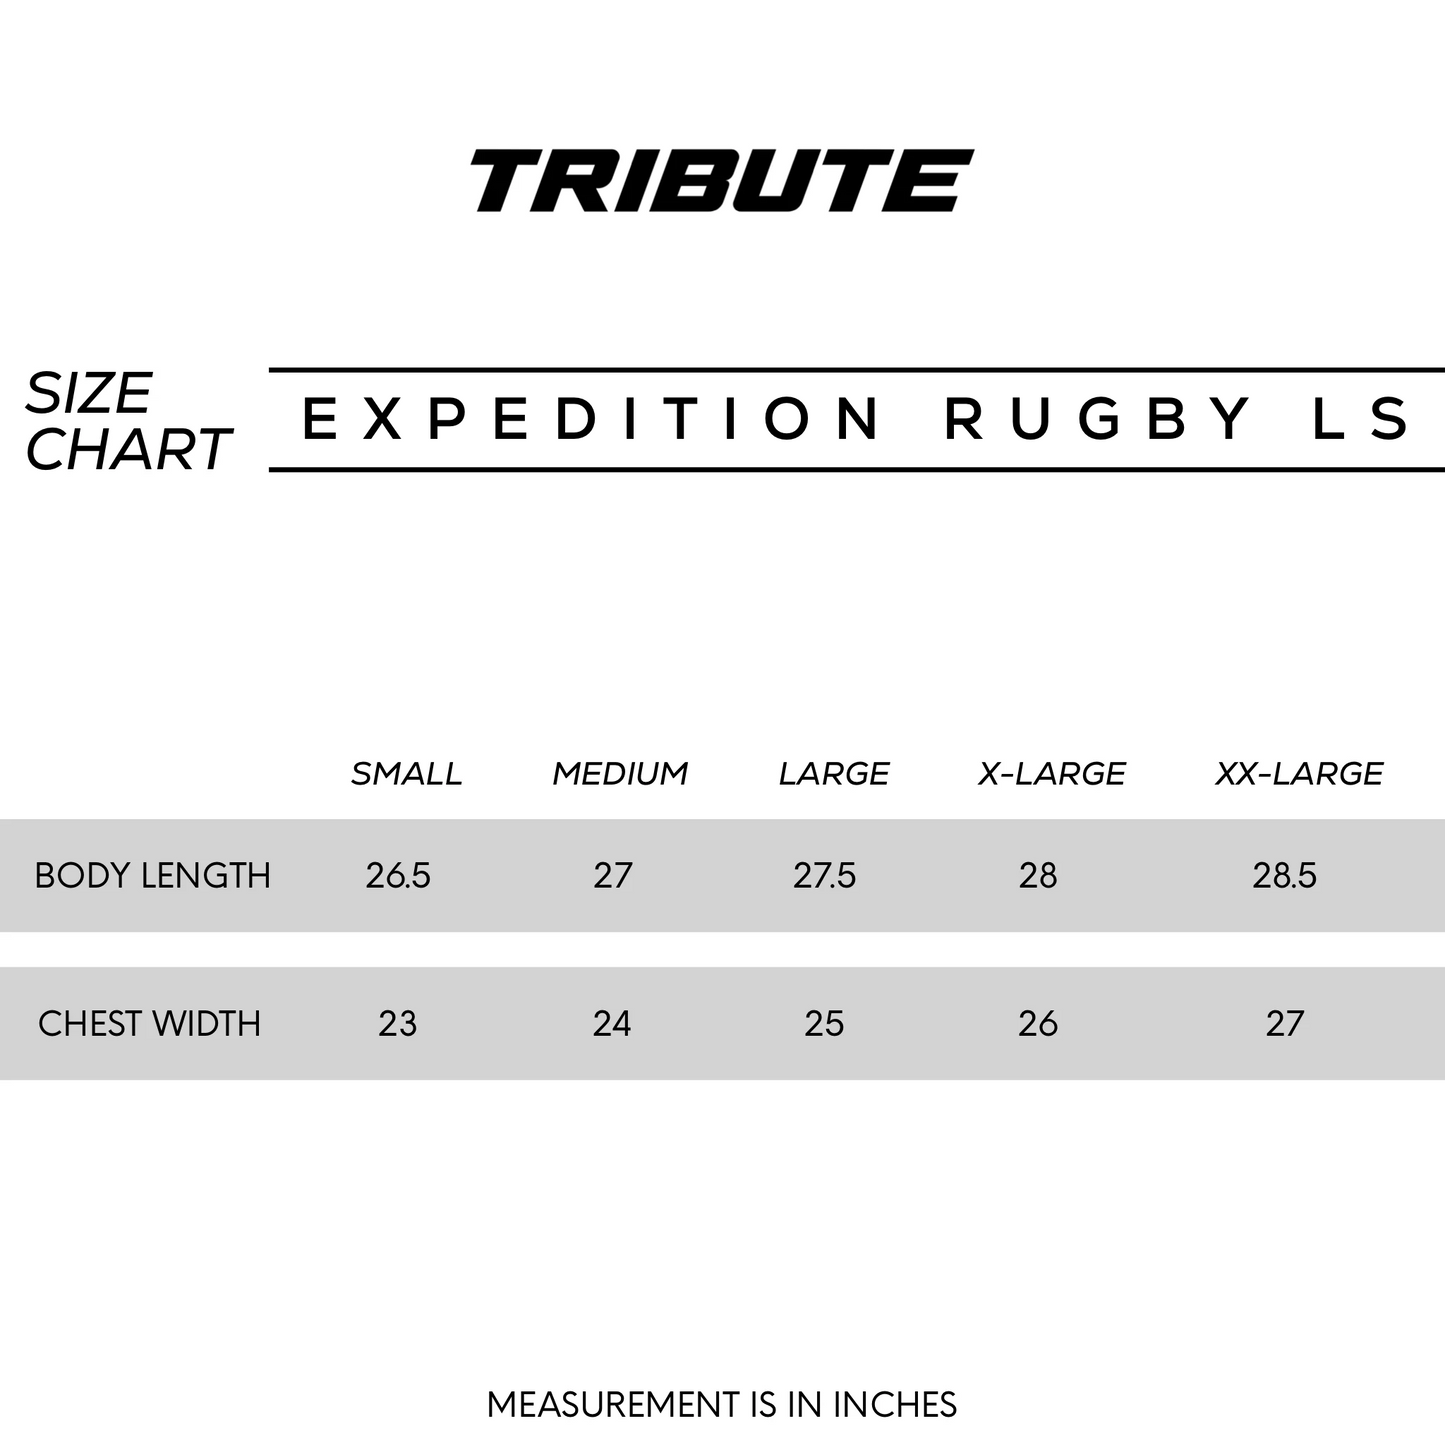 Expedition Rugby LS